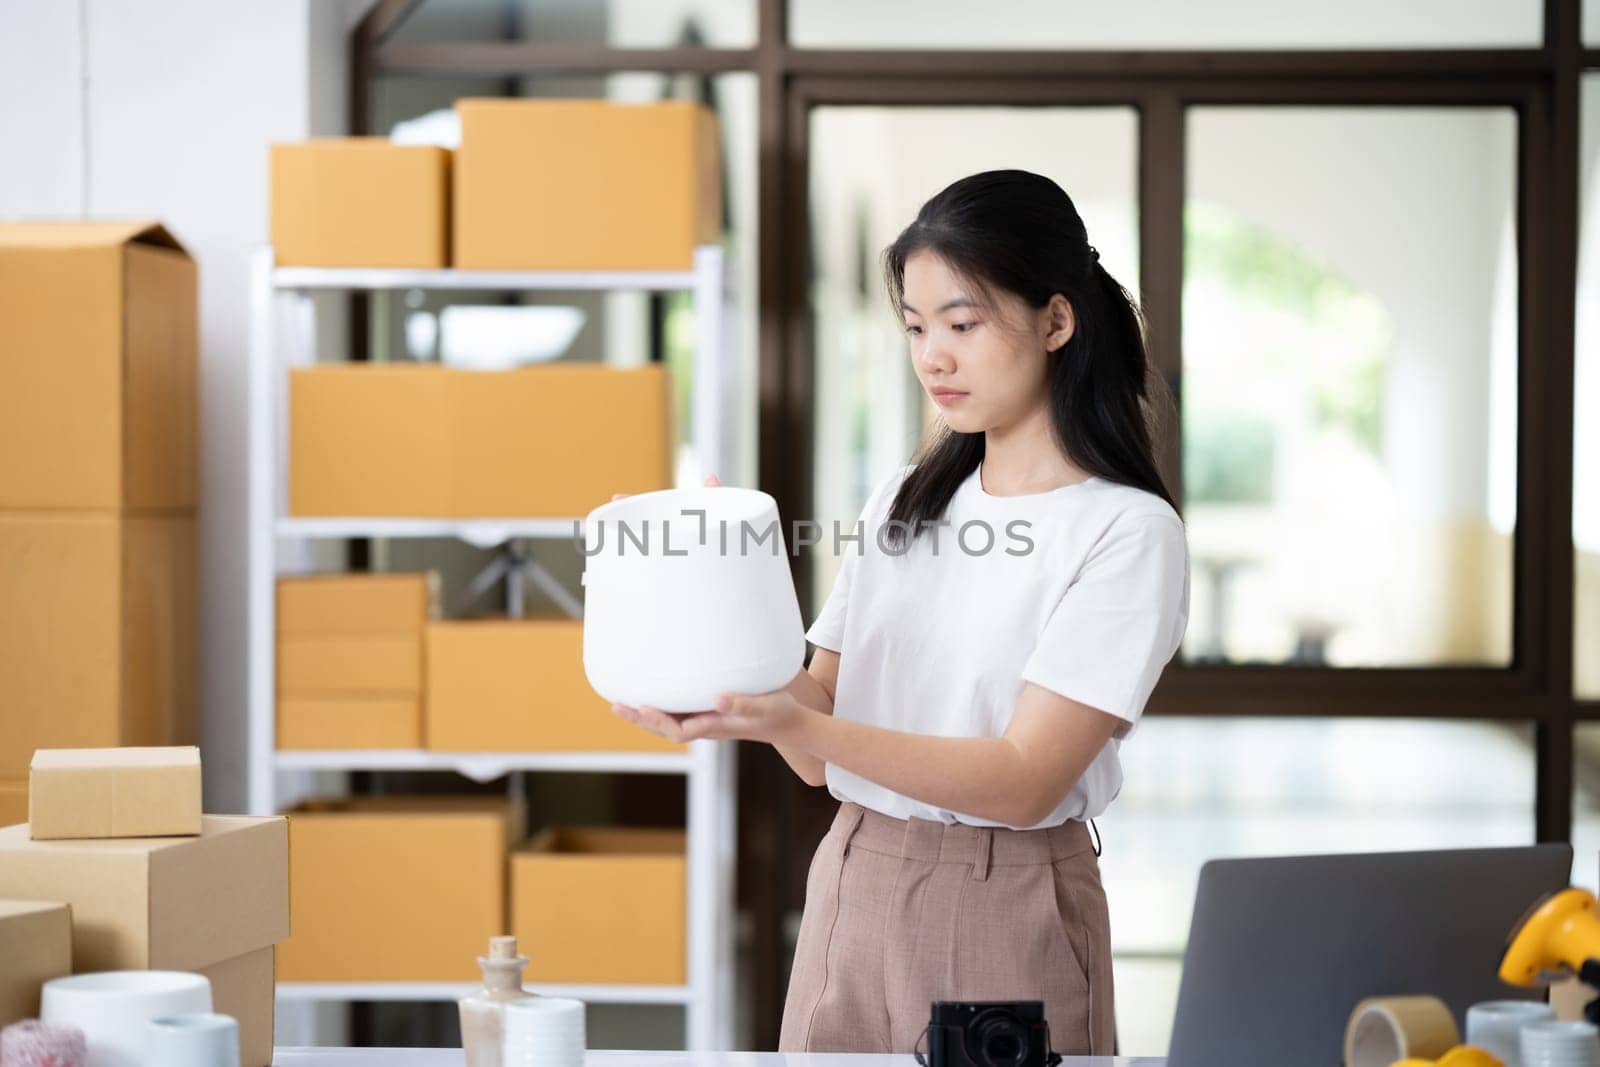 Attentive business owner thoroughly examining a product to ensure top quality before dispatch in her online shop workspace.